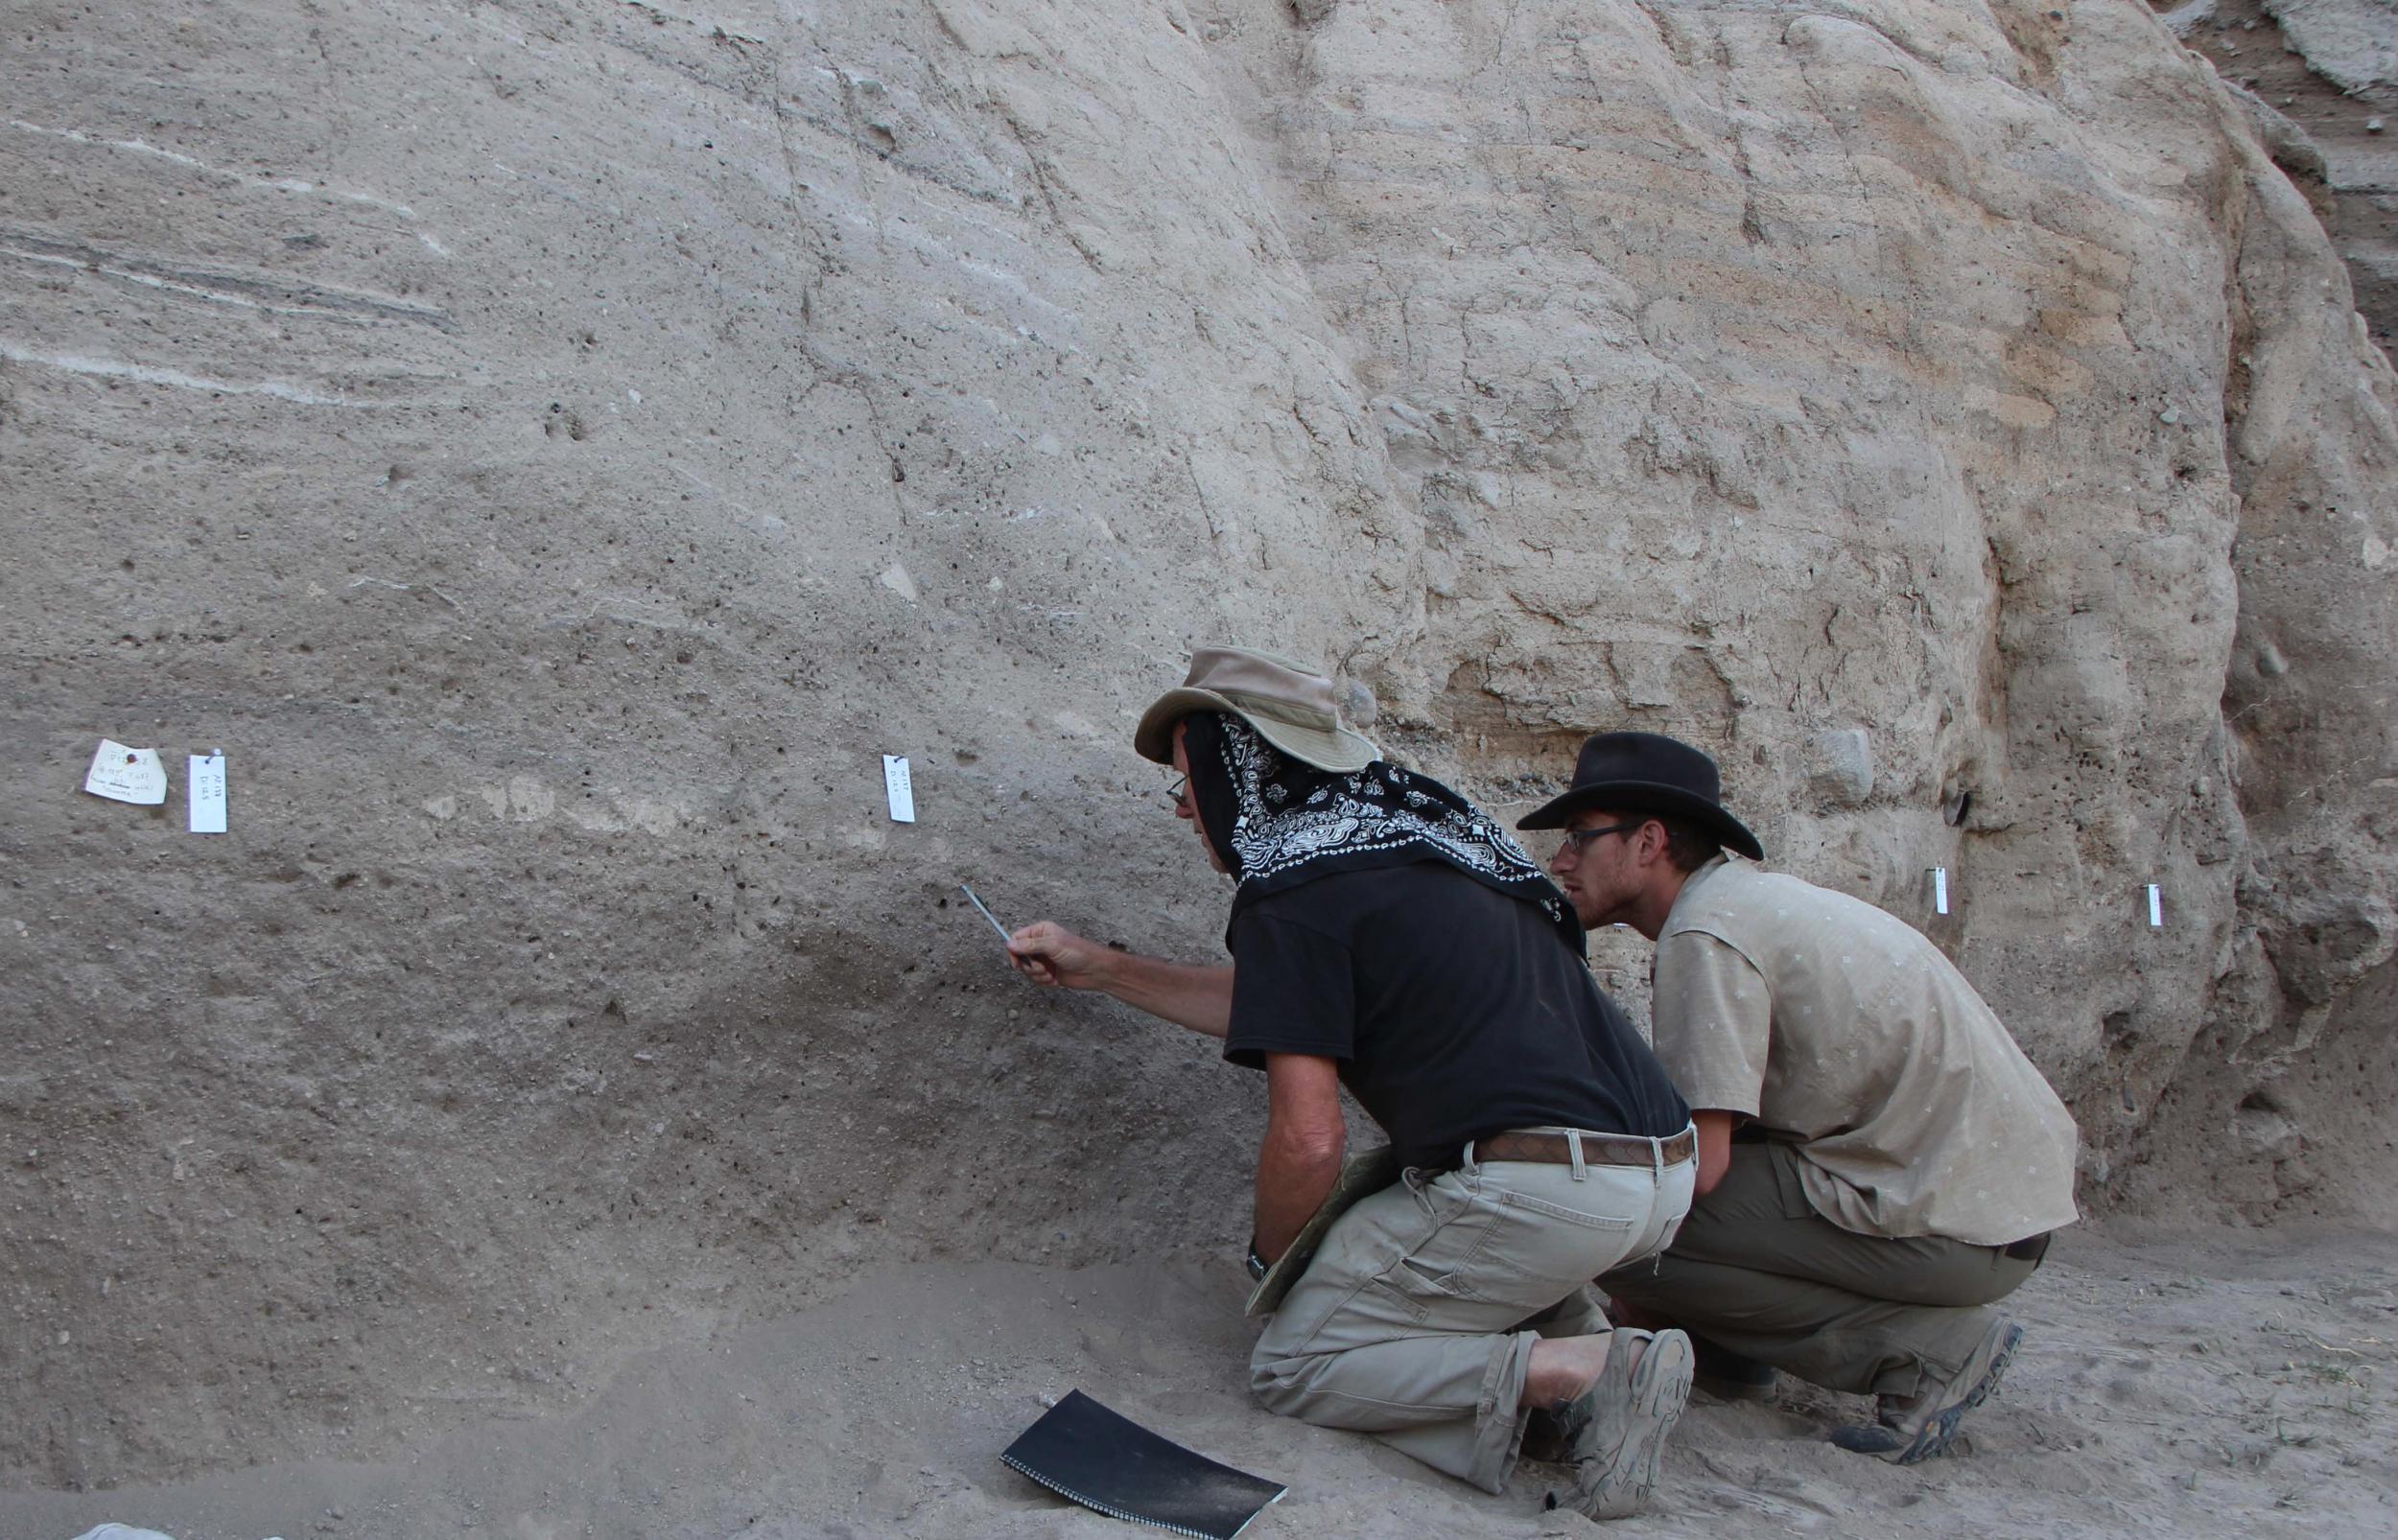 Study authors Jay Quade (left) and Jordan Abell (right) looking for optimal samples at the site of an ancient Turkish settlement where salts left behind by animal and human urine give clues about the development of livestock herding.